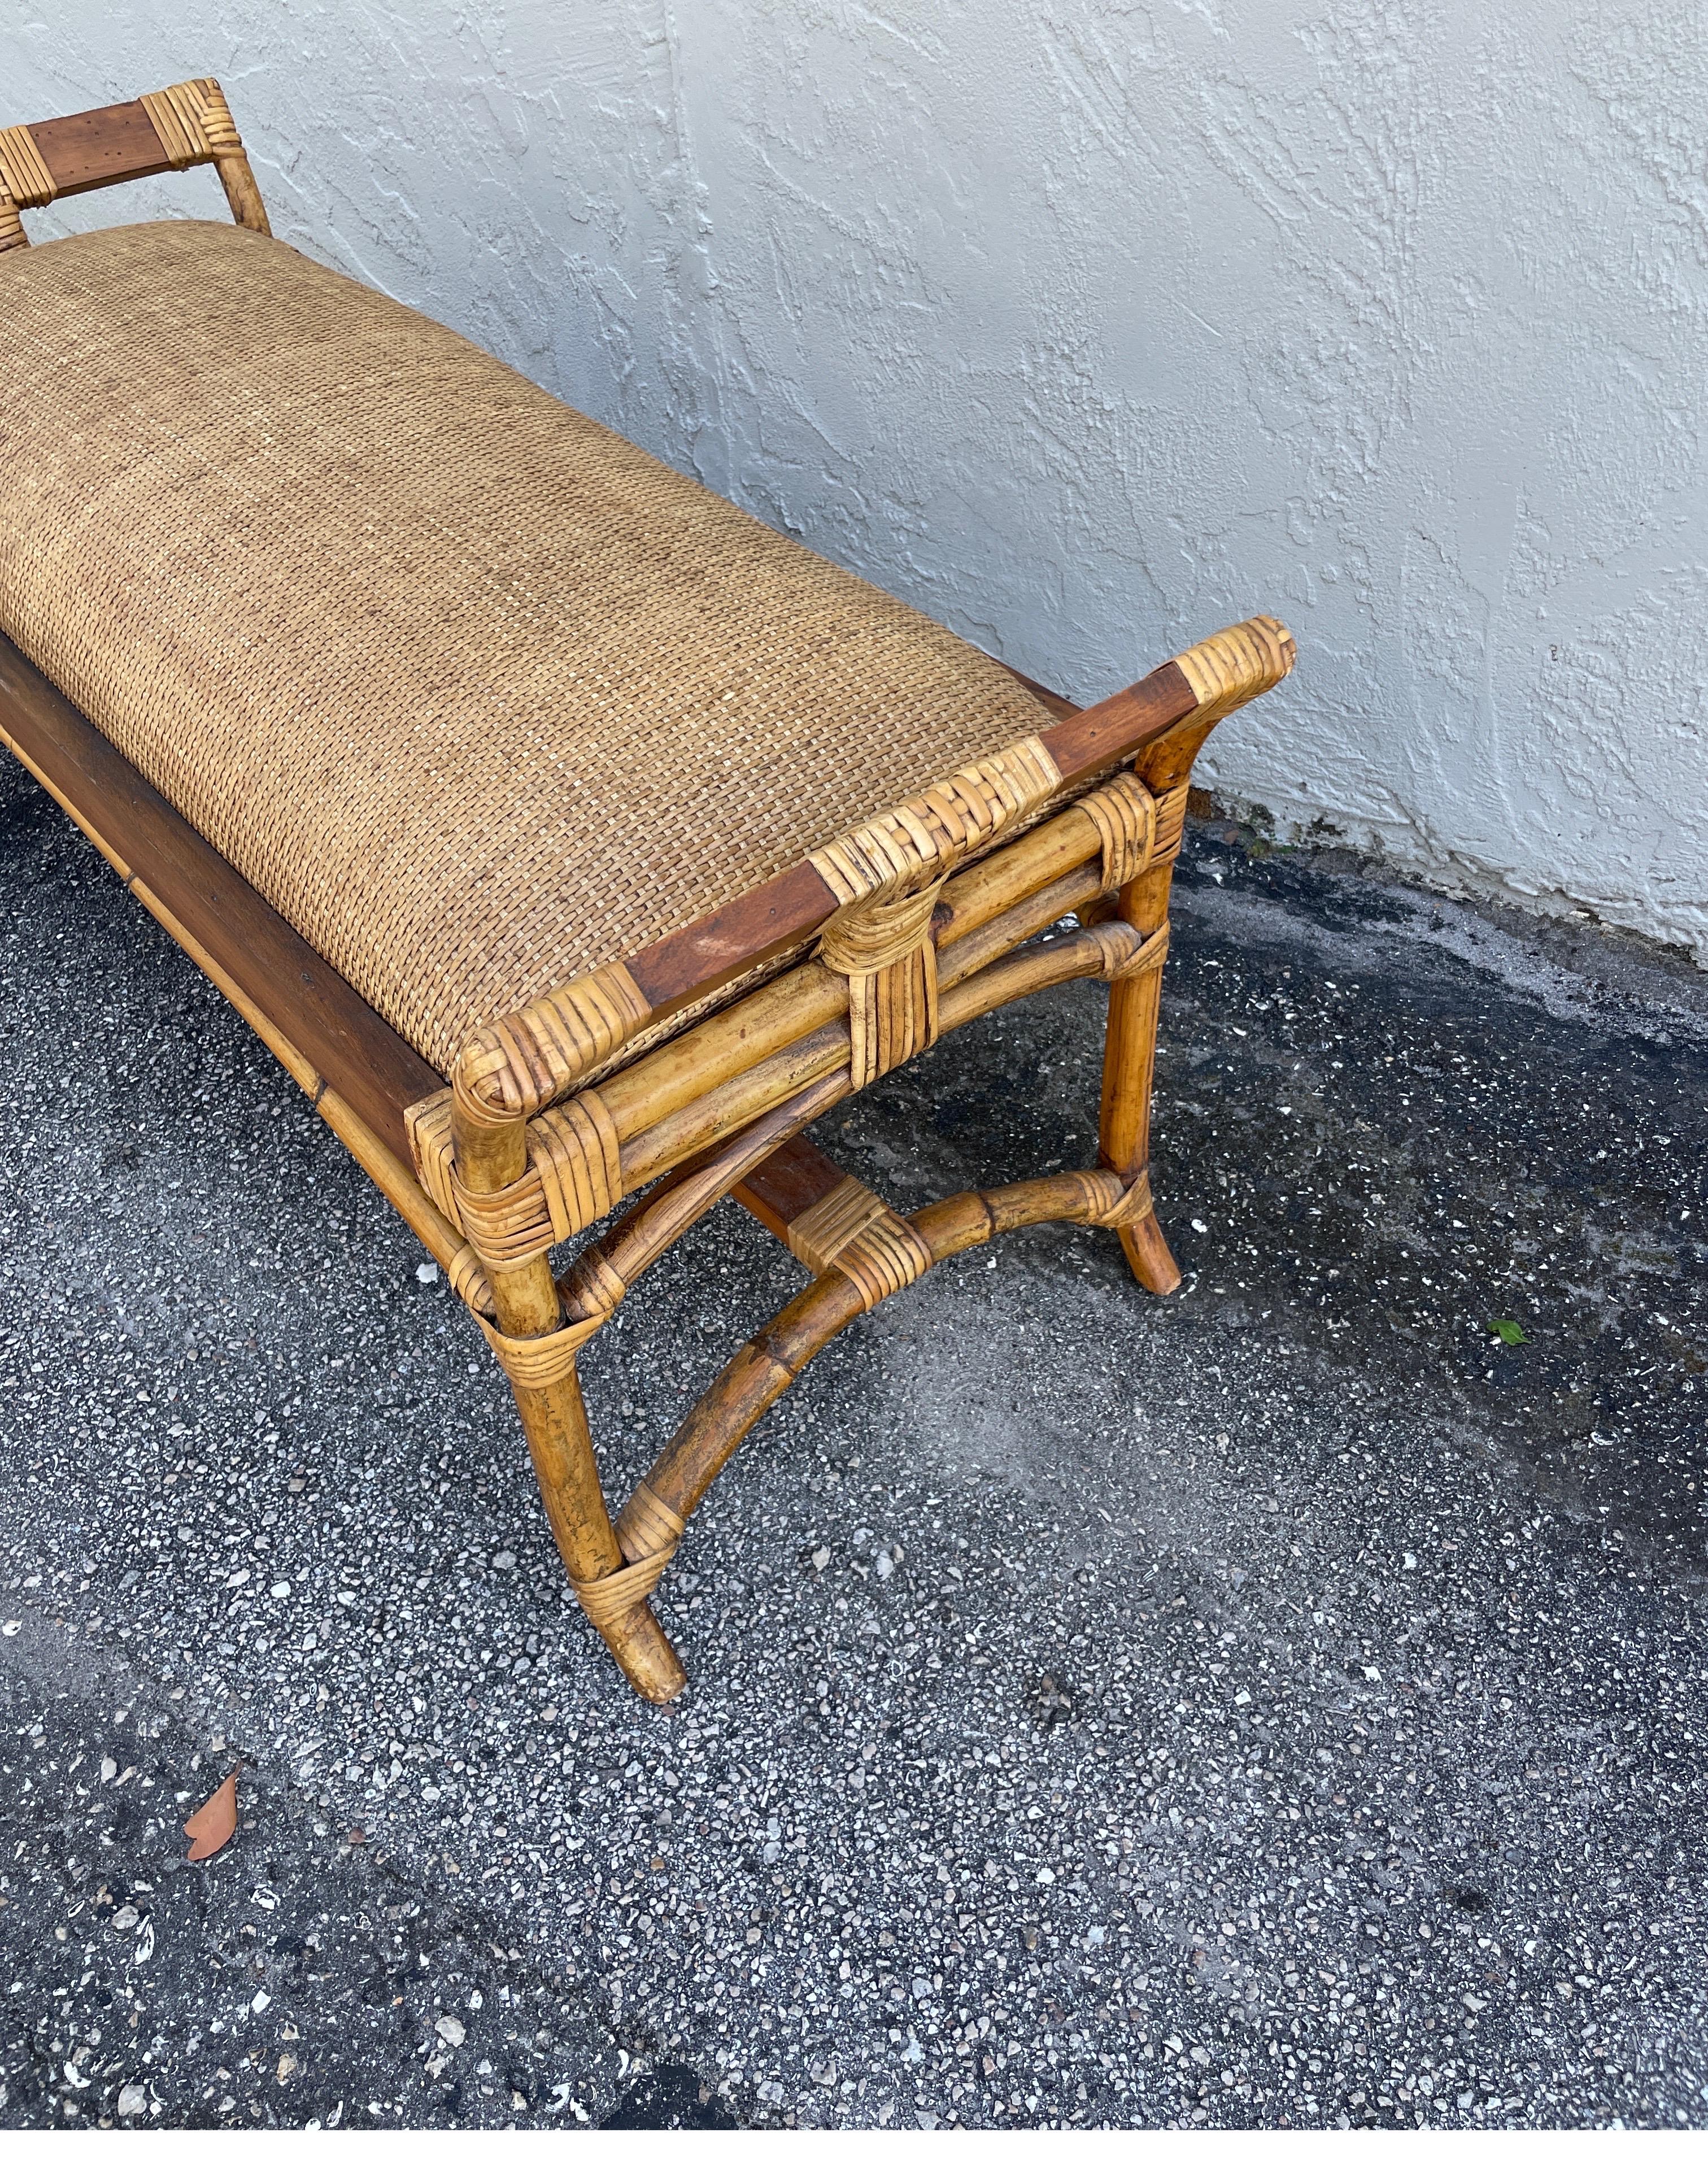 Vintage Bamboo bench with a padded seat cushion. Very well constructed and sturdy,